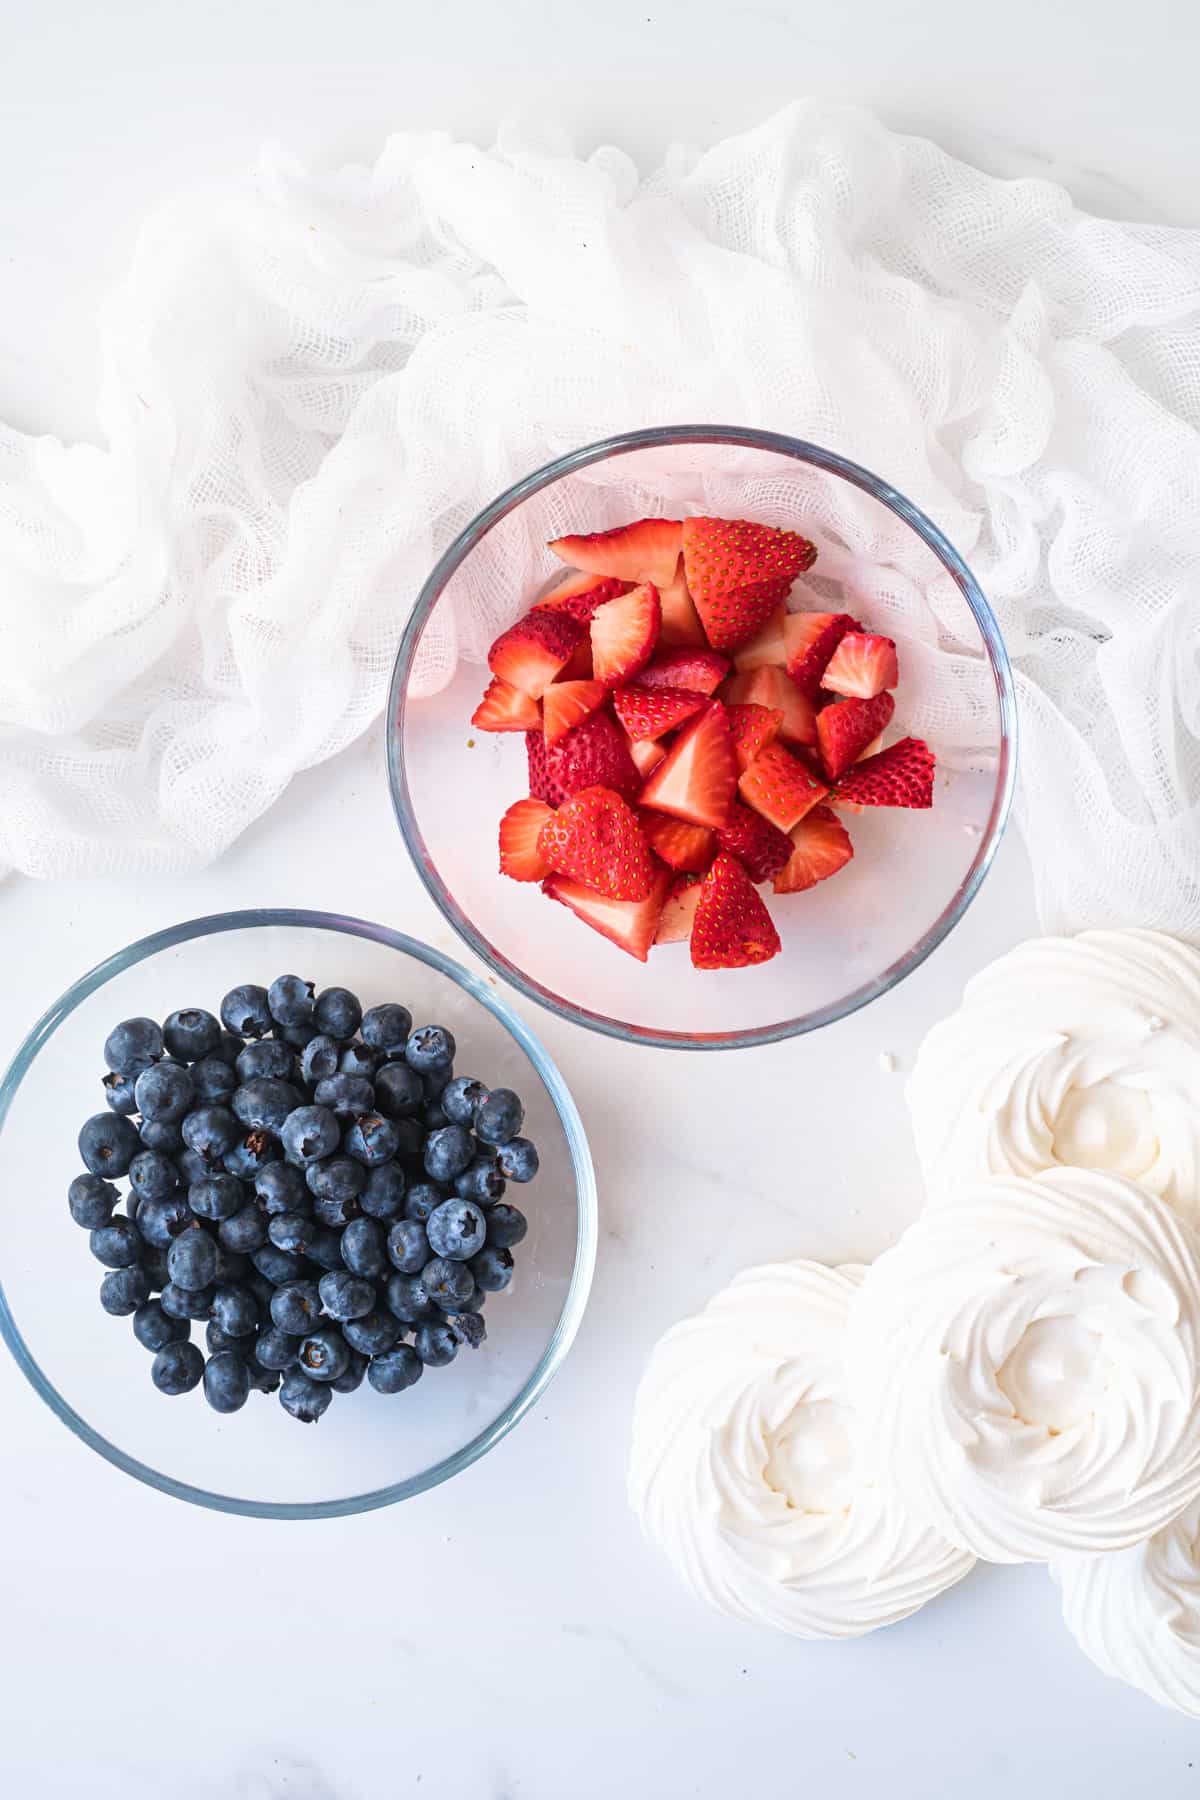 Mini Pavlovas and berries on a table